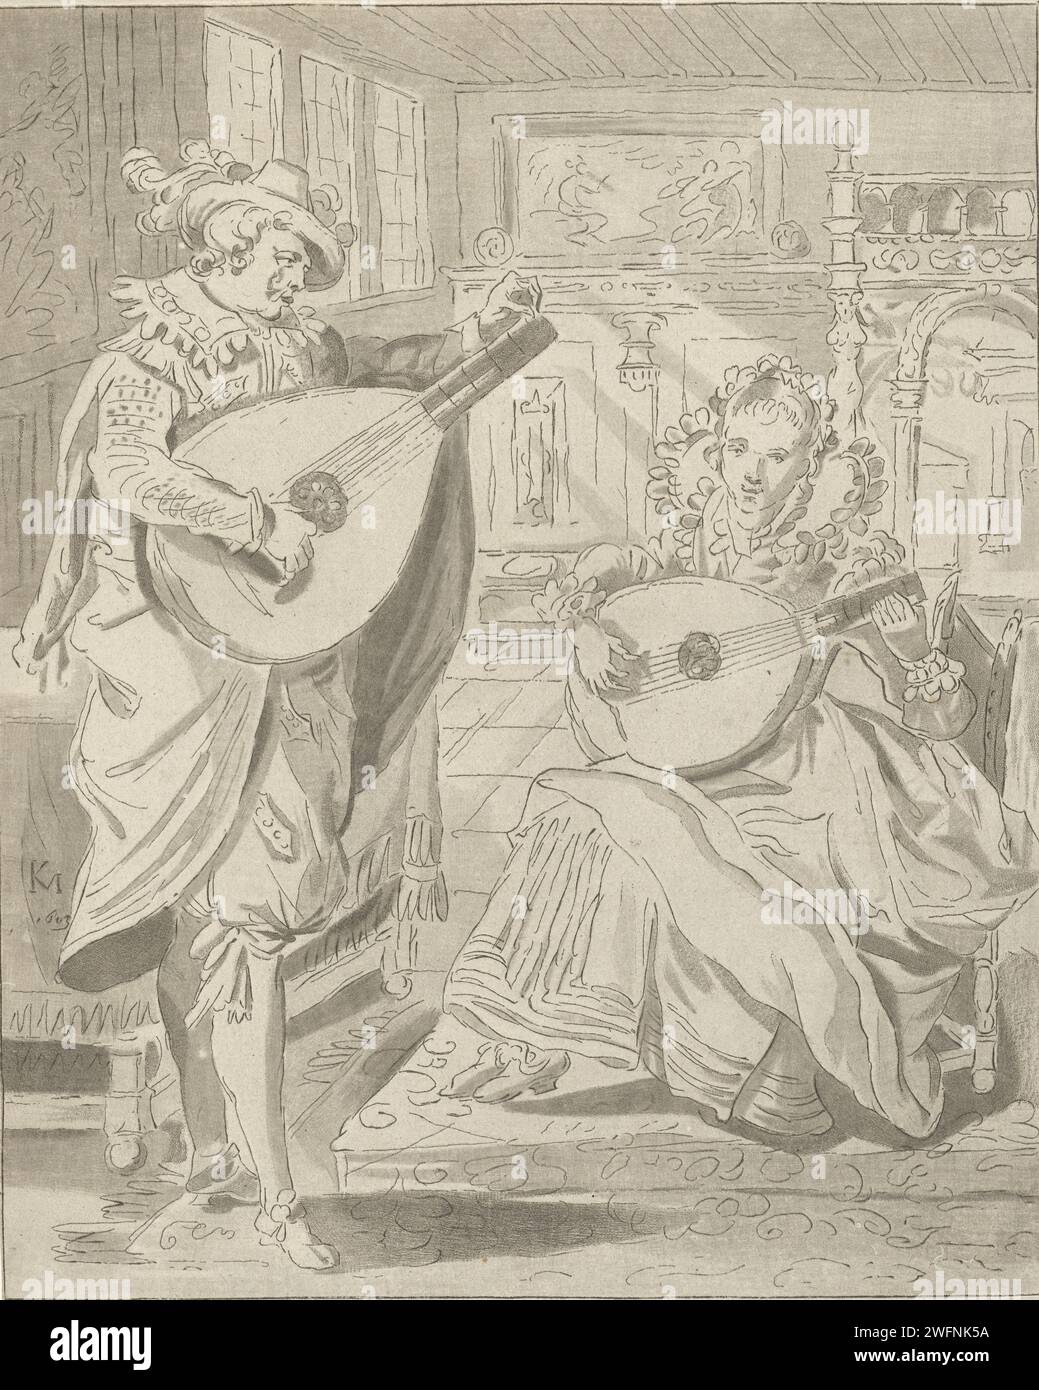 Luiten playing Lord and Dame, Cornelis Ploos van Amstel, After Karel van Mander (I), 1772 print Interior with a man and a woman who both play the lute. Amsterdam paper etching lute, and special forms of lute, e.g.: theorbo. interior of the house Stock Photo